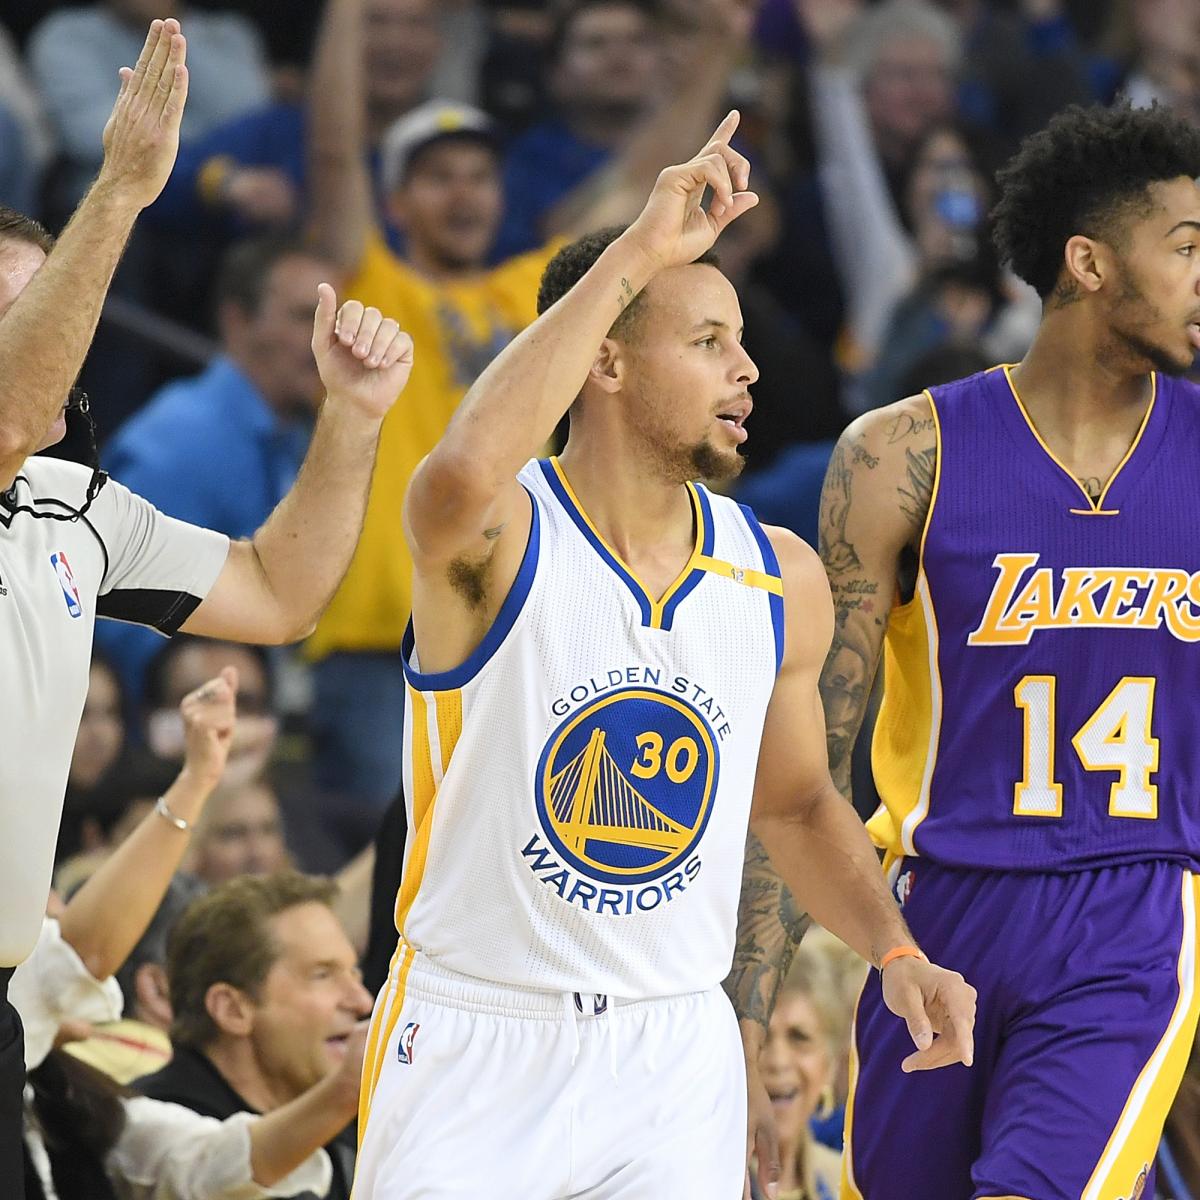 Golden State Warriors vs. Los Angeles Lakers: Live Updates, Score